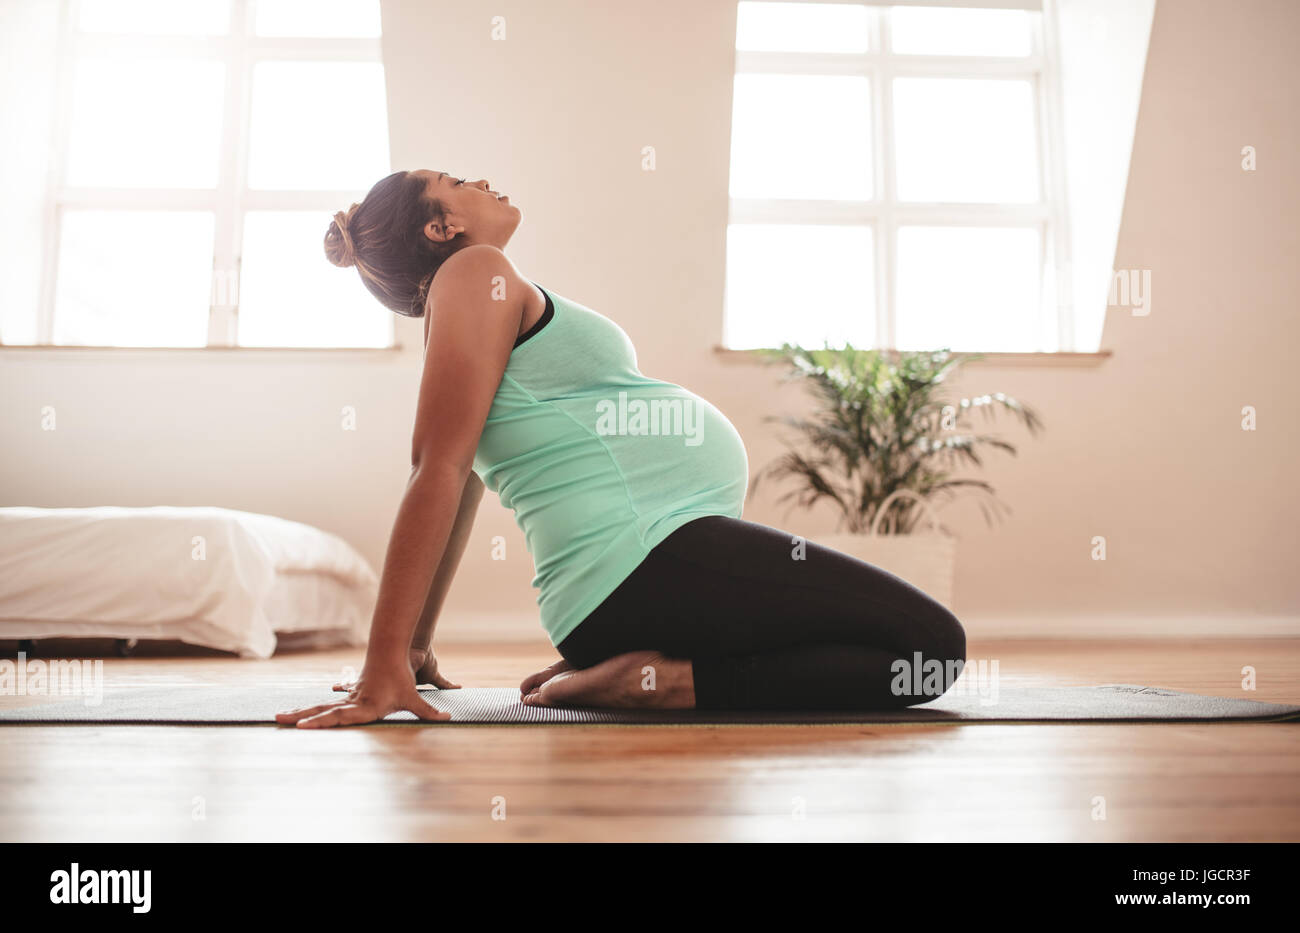 Side view of young pregnant woman kneeling on exercise mat and stretching backwards. Expectant mother practising pregnancy yoga at home. Stock Photo